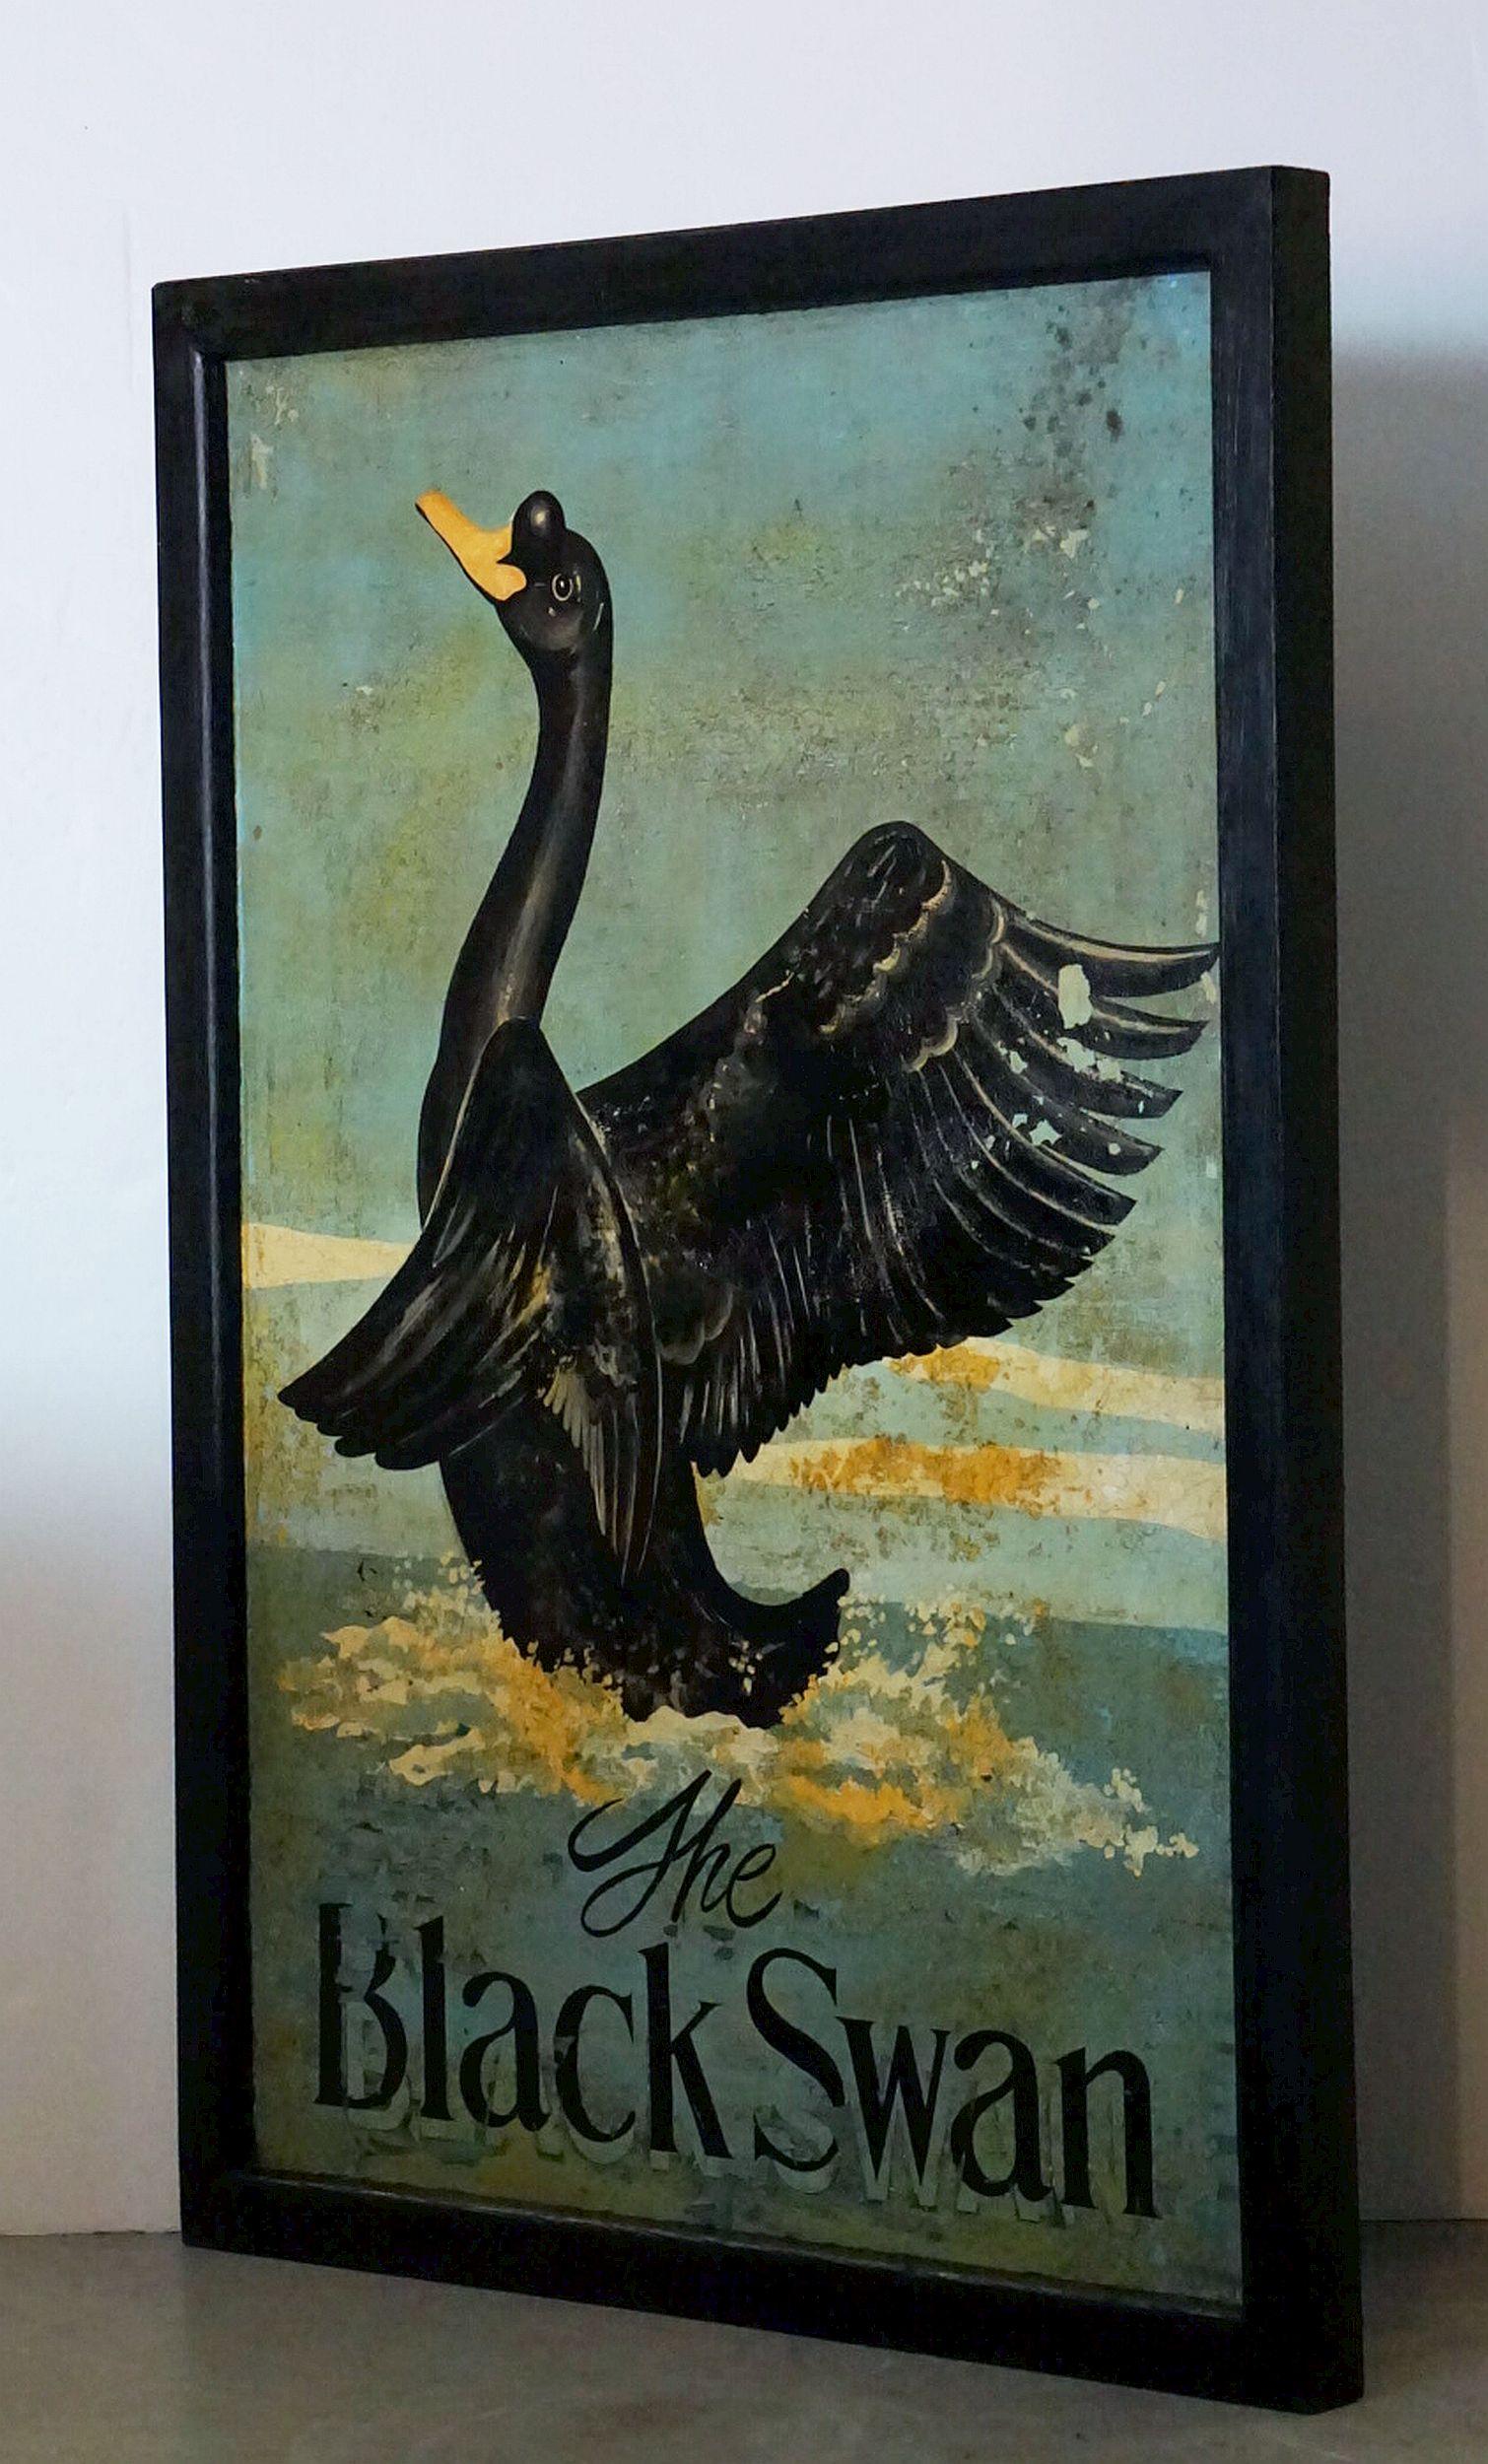 An authentic English pub sign (one-sided) featuring a painting of a black swan upon the water, entitled: The Black Swan.

A very fine example of vintage advertising artwork, ready for display.